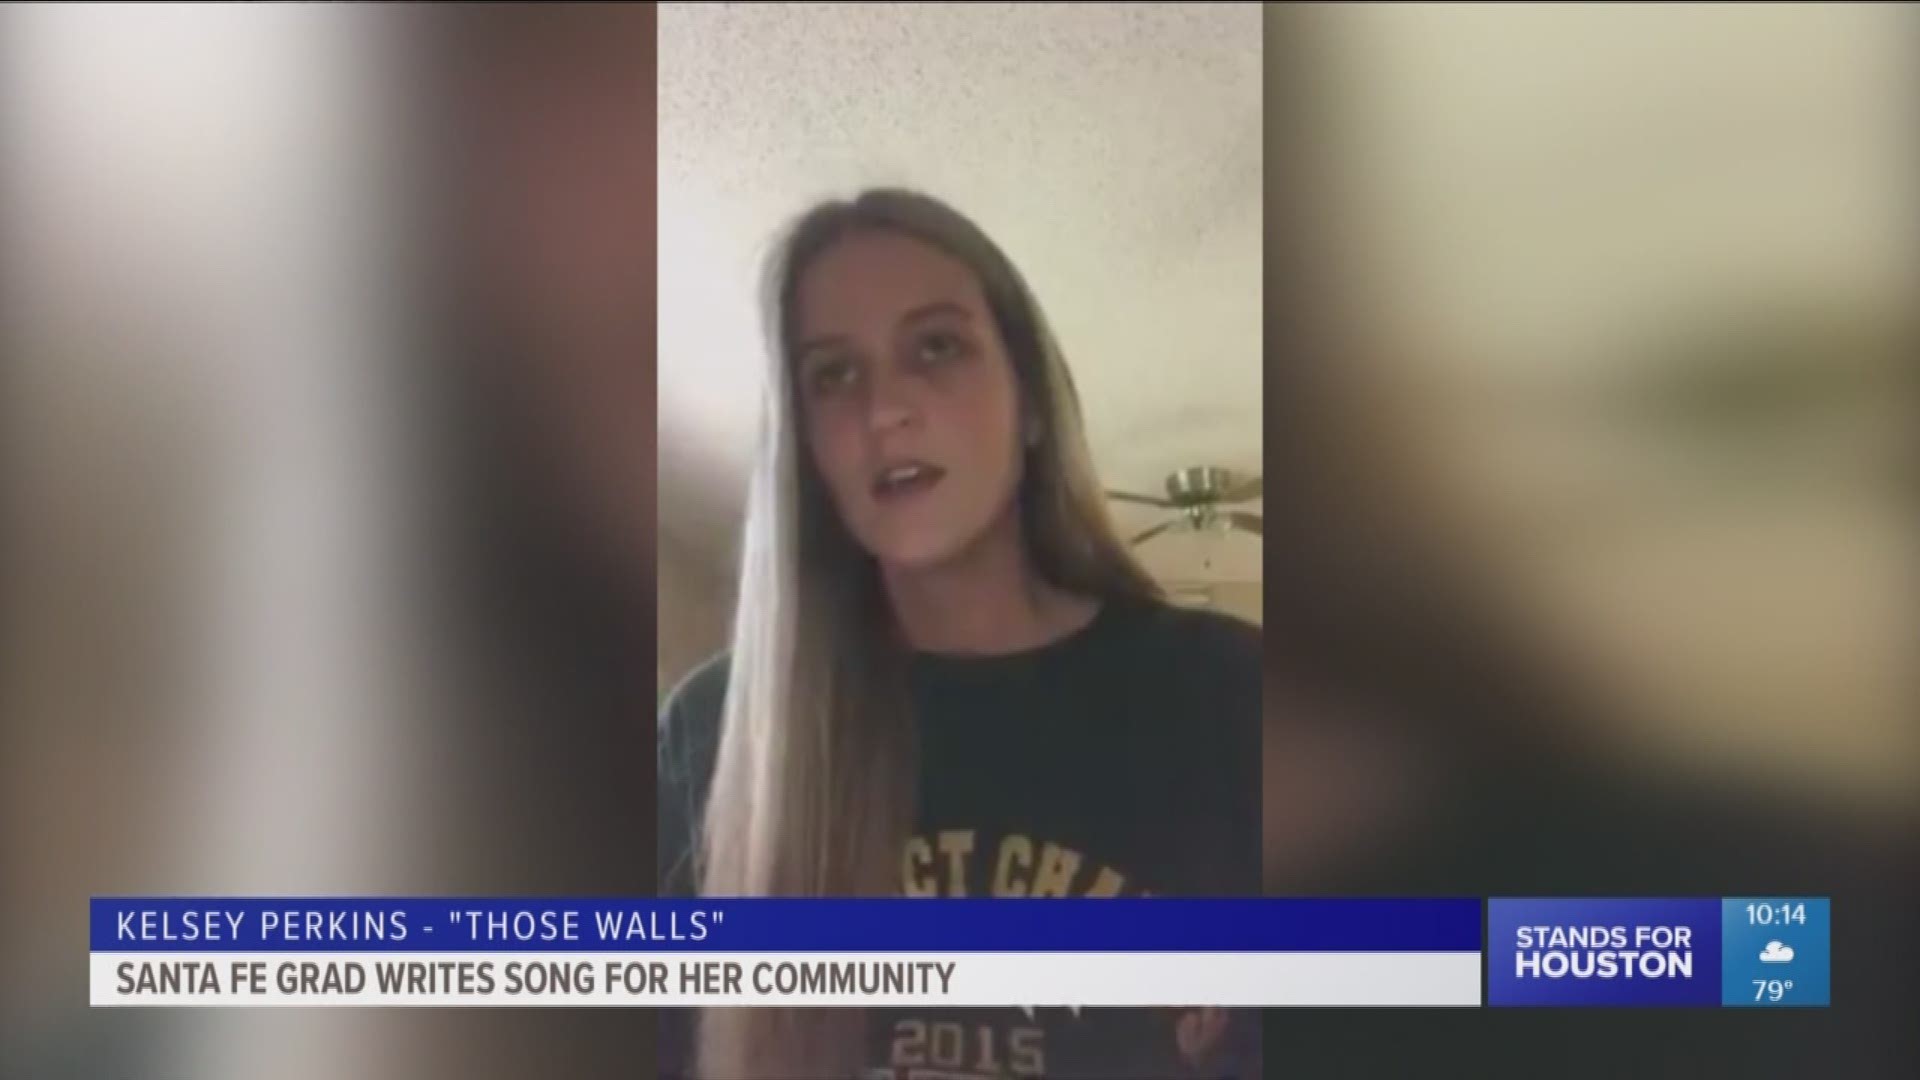 The song is called "Those Walls" and it's touching the hearts of the Santa Fe community.